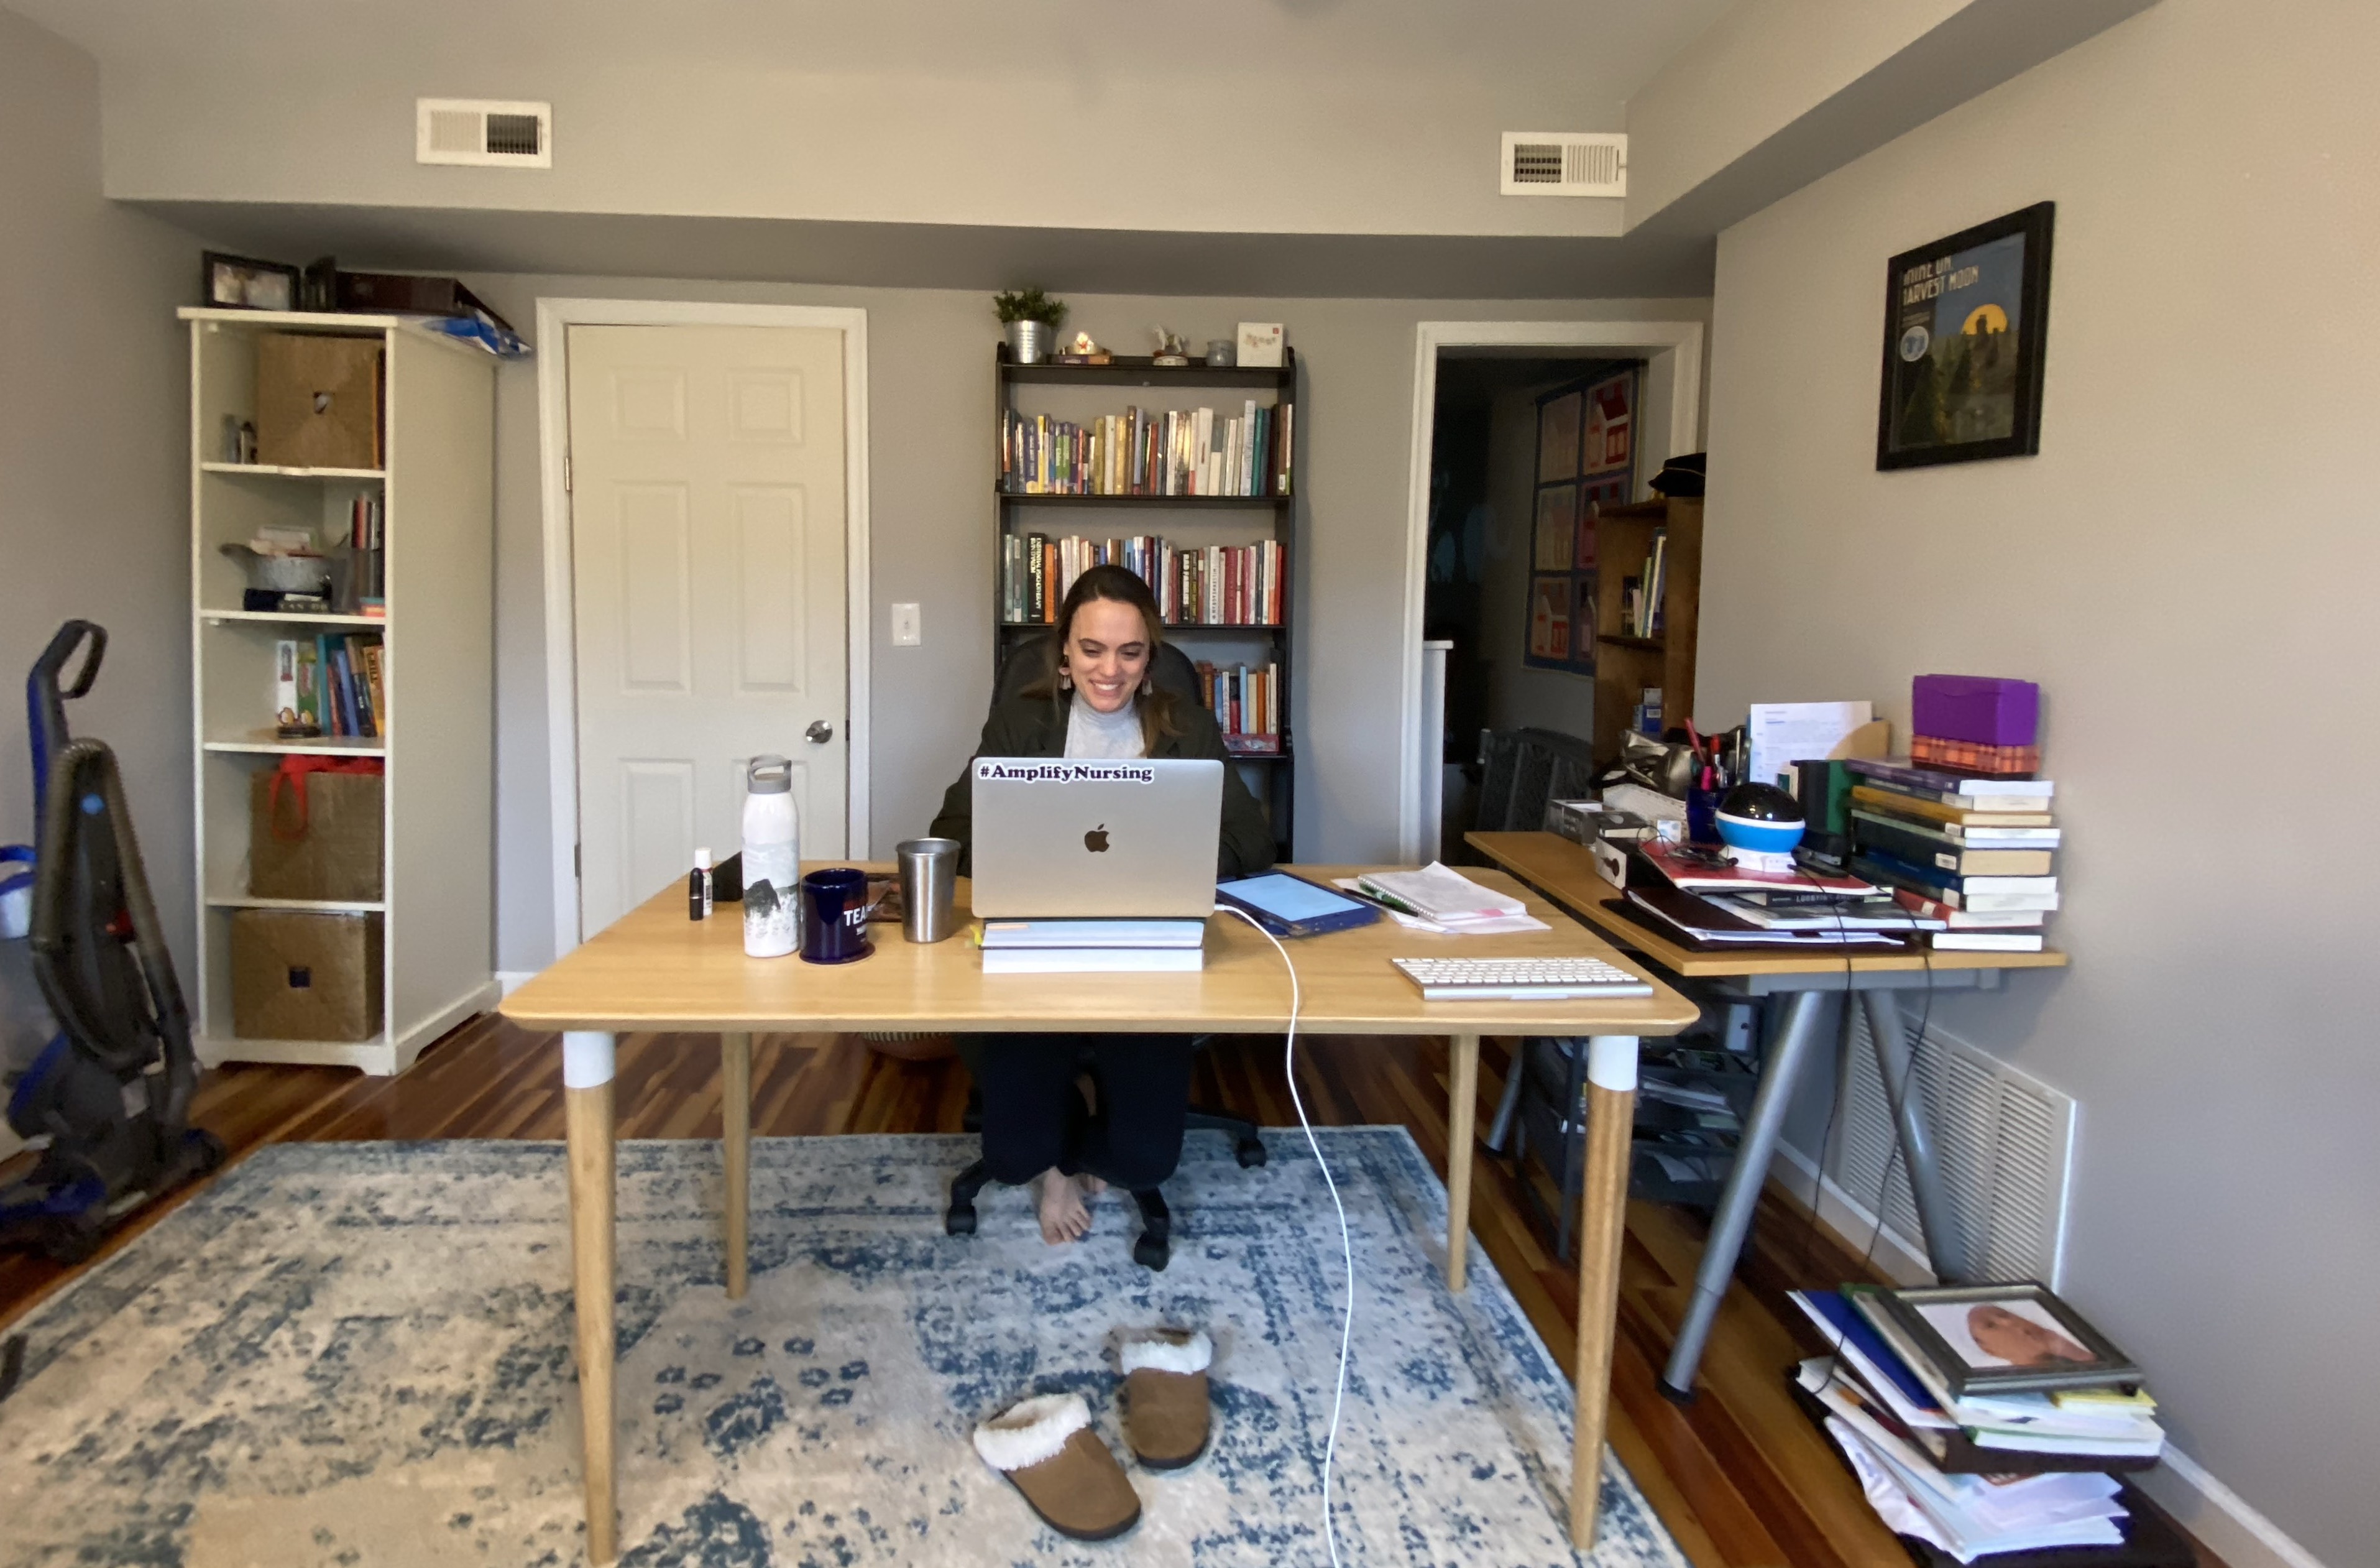 A person sitting at a desk behind a computer. The room has books piled up on the desk, and two bookshelves in the background, along with a vacuum to the side and slippers on the floor in front.